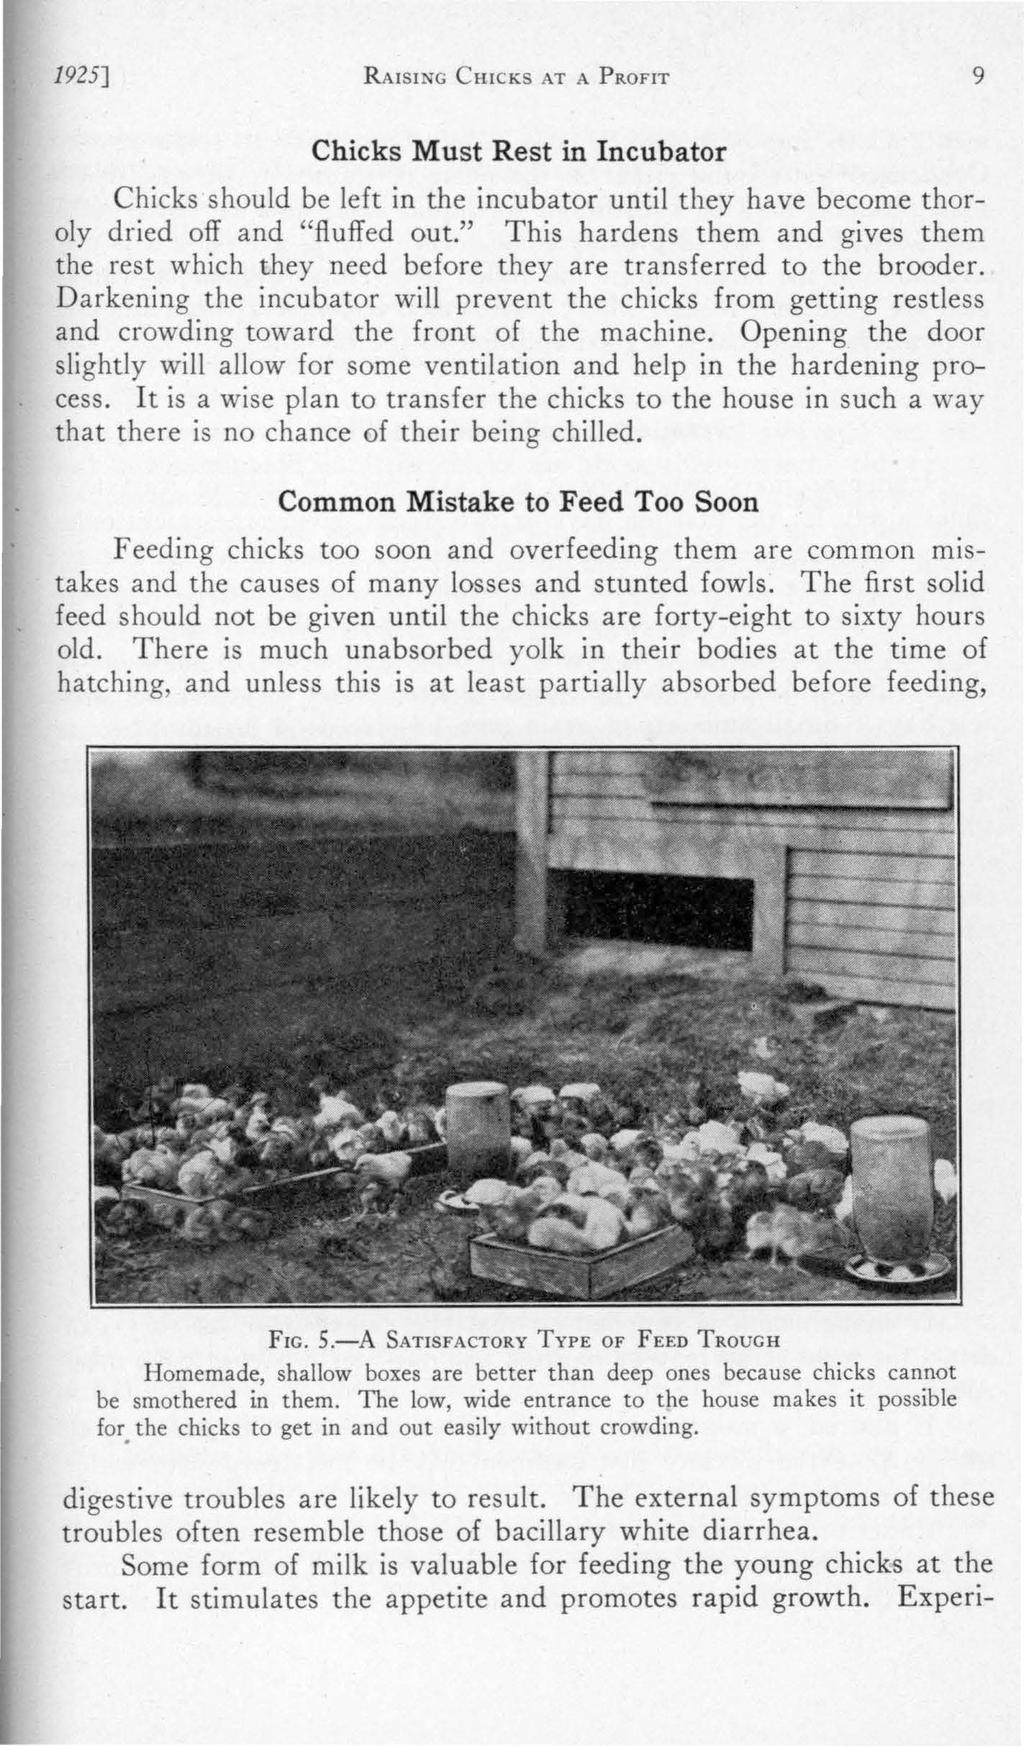 1925] RAISING CHICKS AT A PROFIT 9 Chicks Must Rest in Incubator Chicks should be left in the incubator until they have become thoroly dried off and "fluffed out.